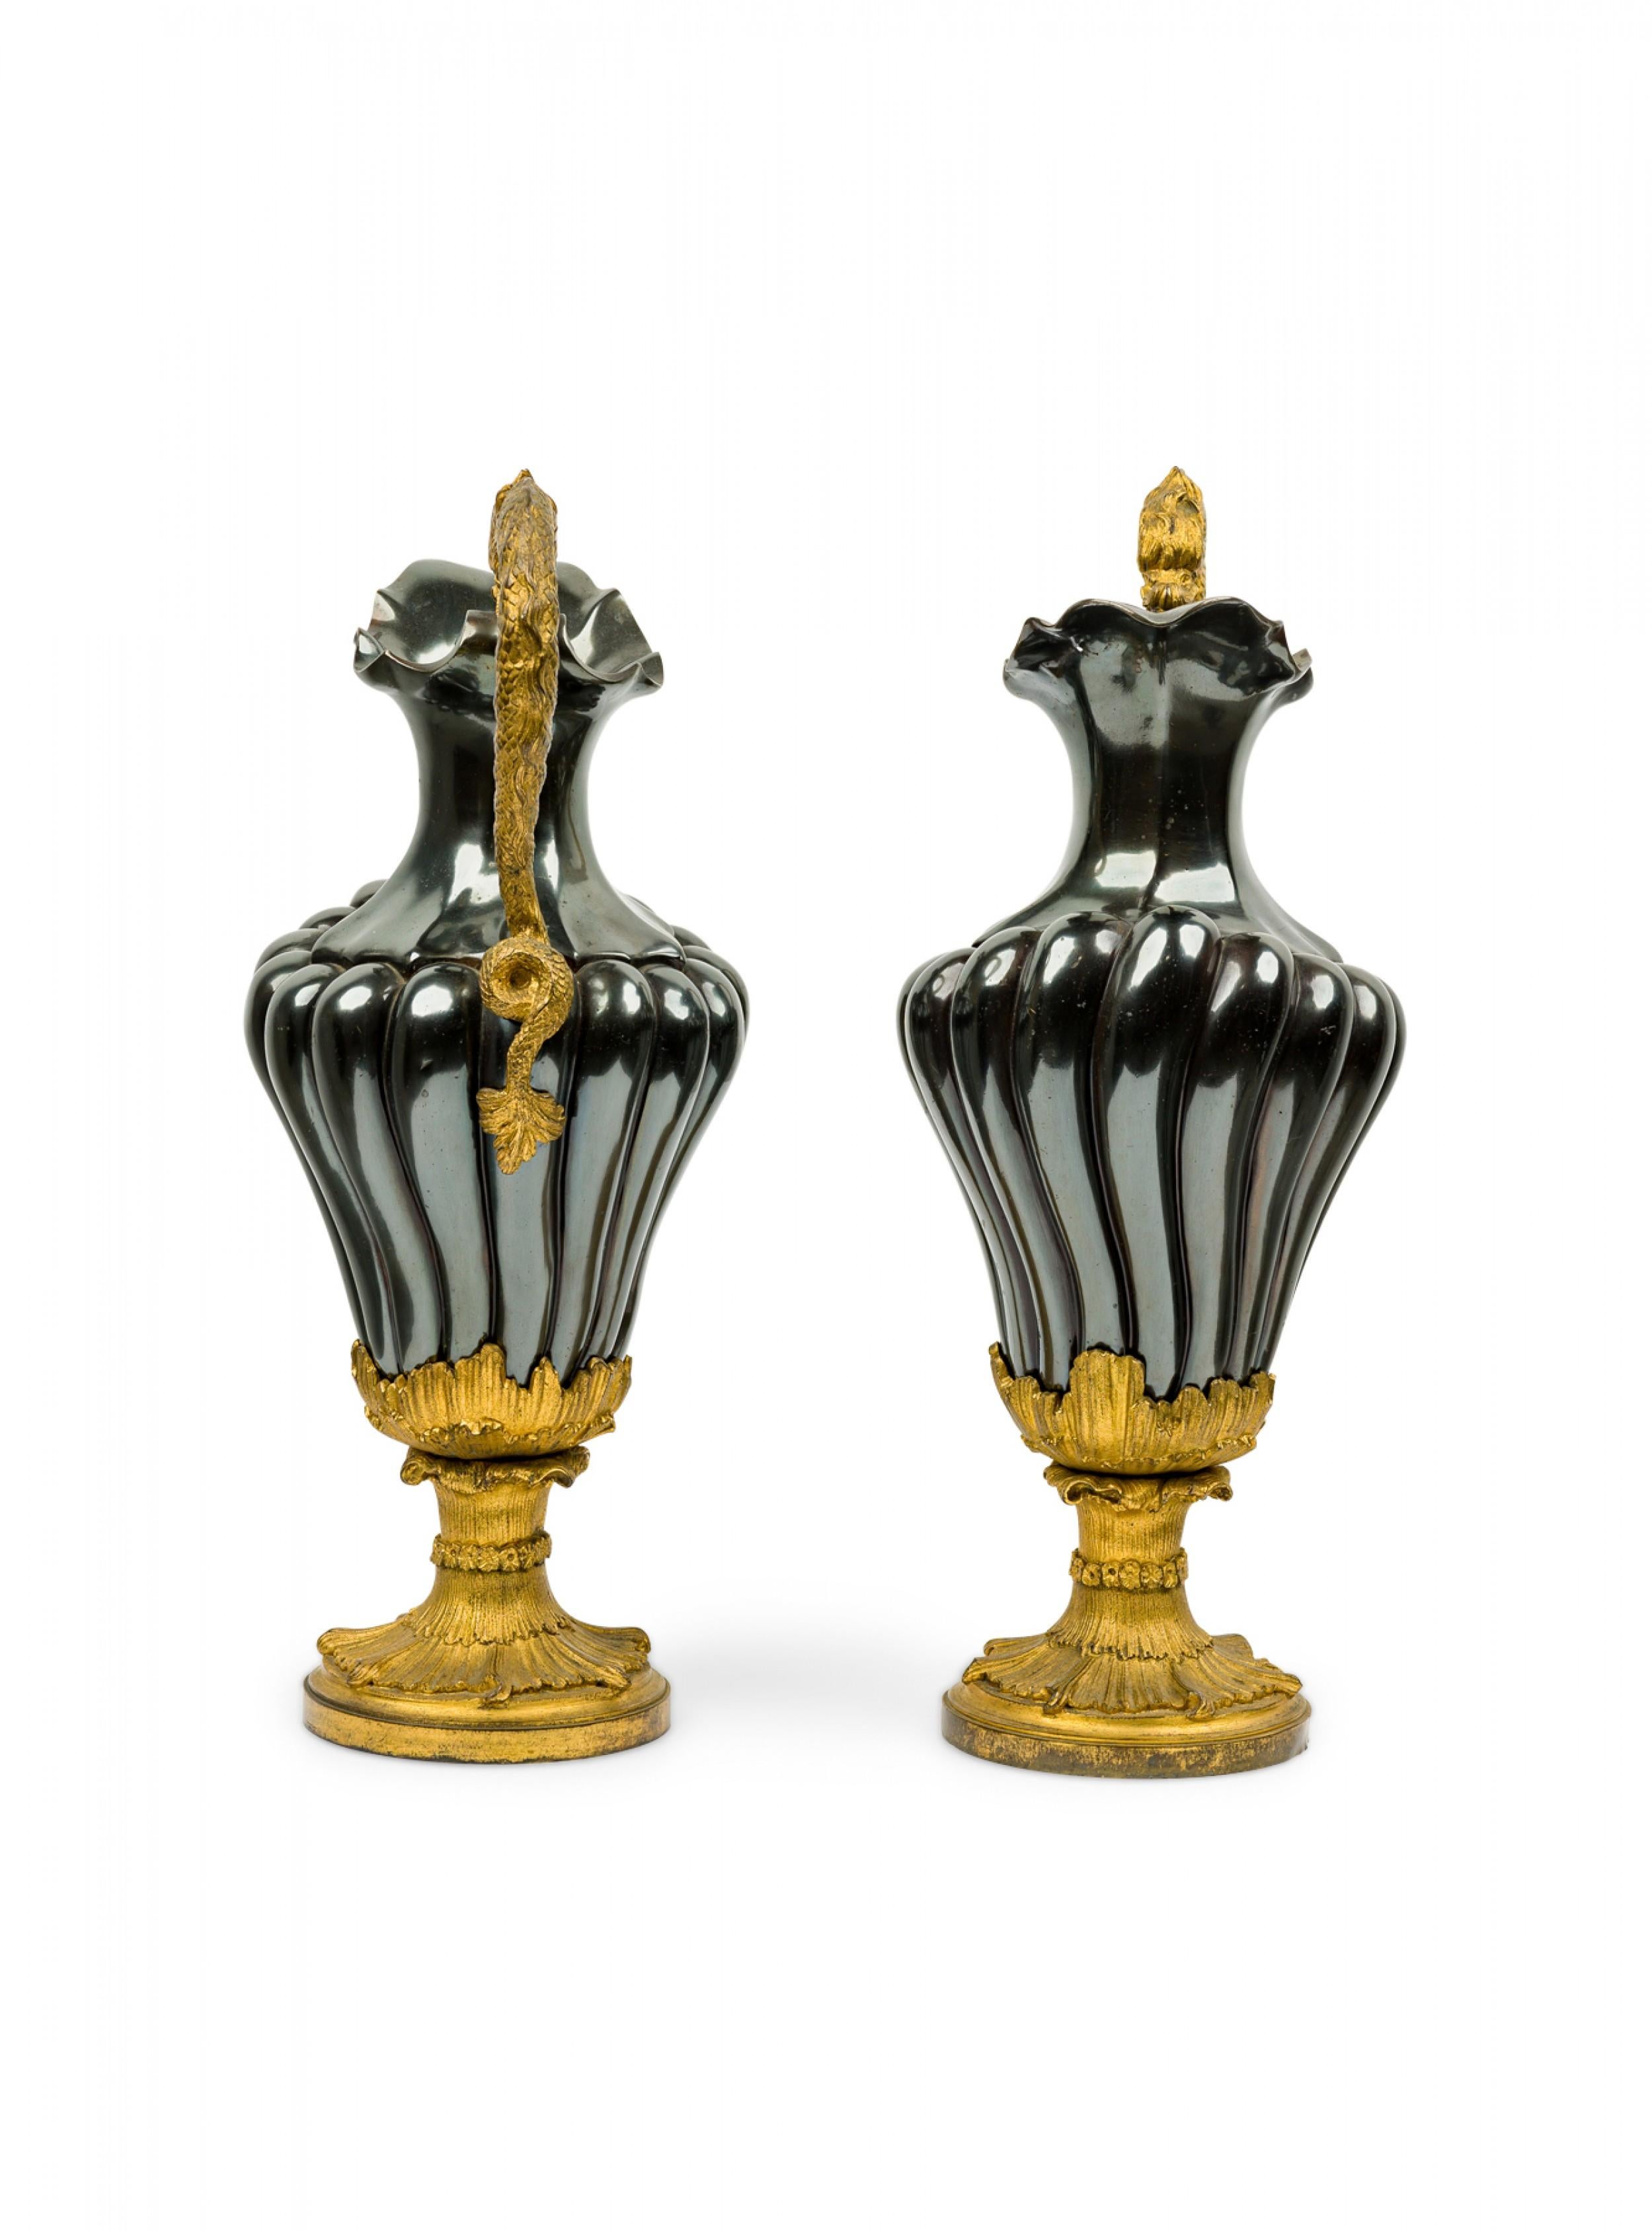 20th Century Pair of French Victorian Enameled Bronze Serpent Handle and Gilt Urns / Ewers For Sale